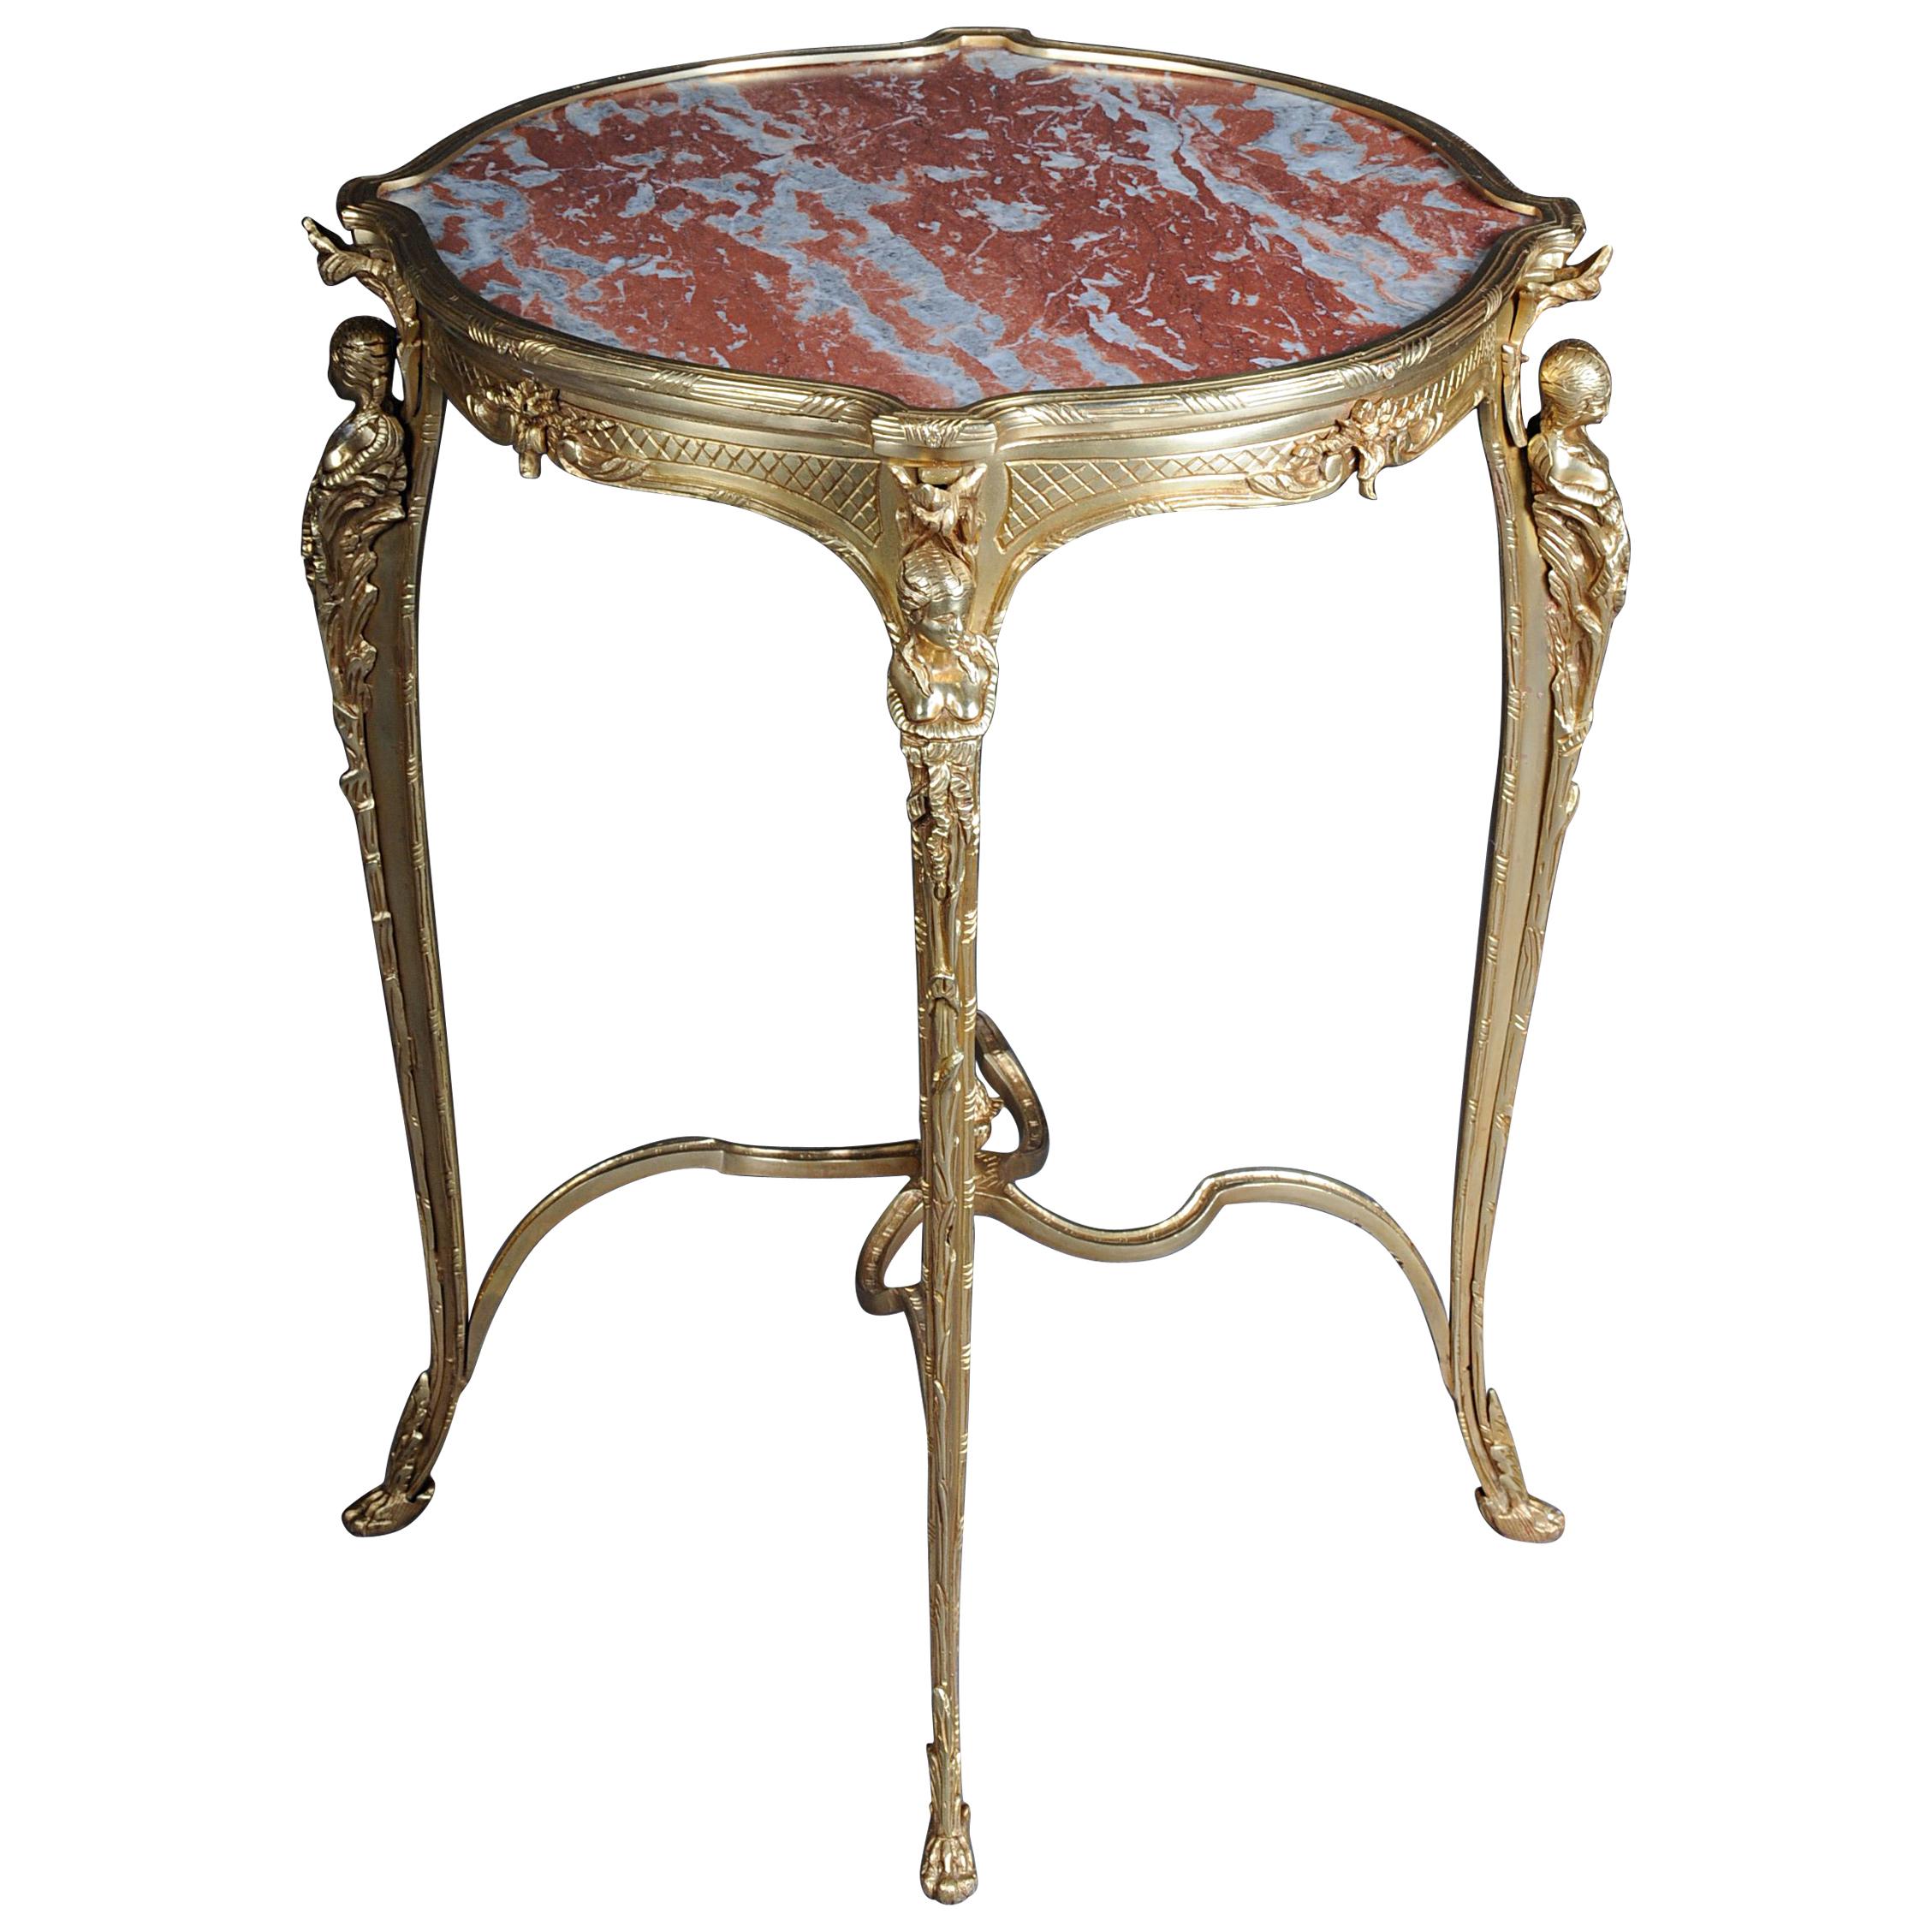 Magnificent French Bronze Pompom Table or Side Table to Zwiener, Napoleon III